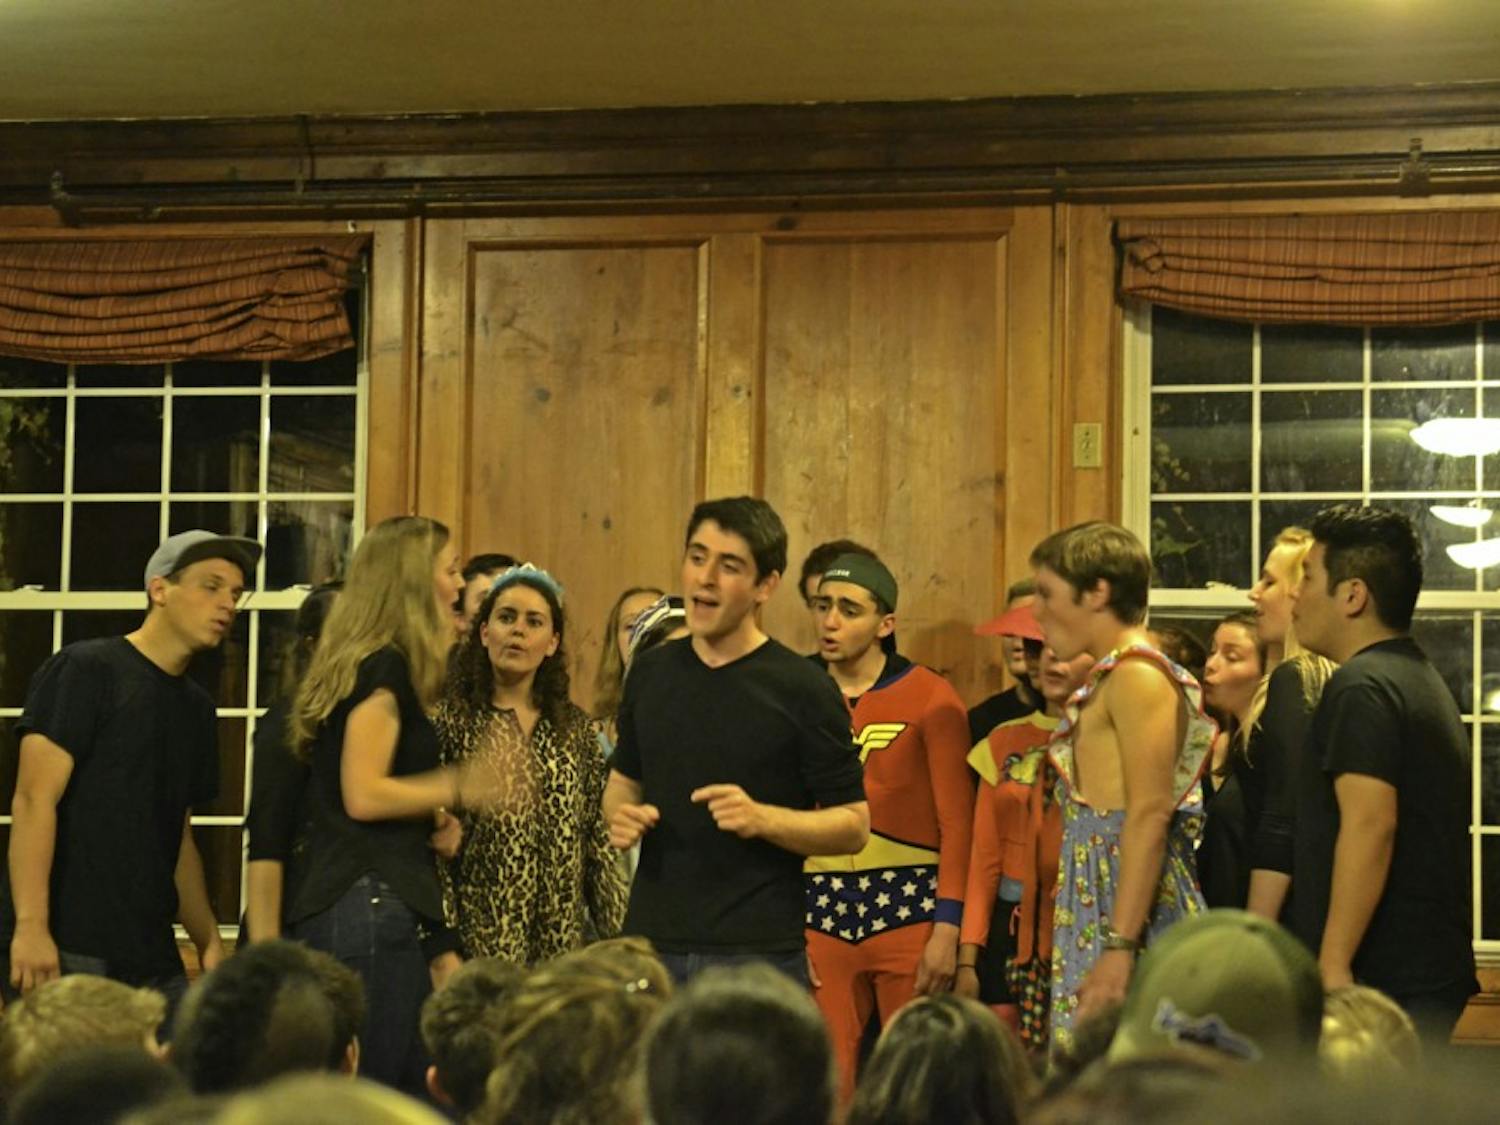 The Dodecaphonics performed at Chi Gamma Epsilon Monday night in a GLC-sponsored event.